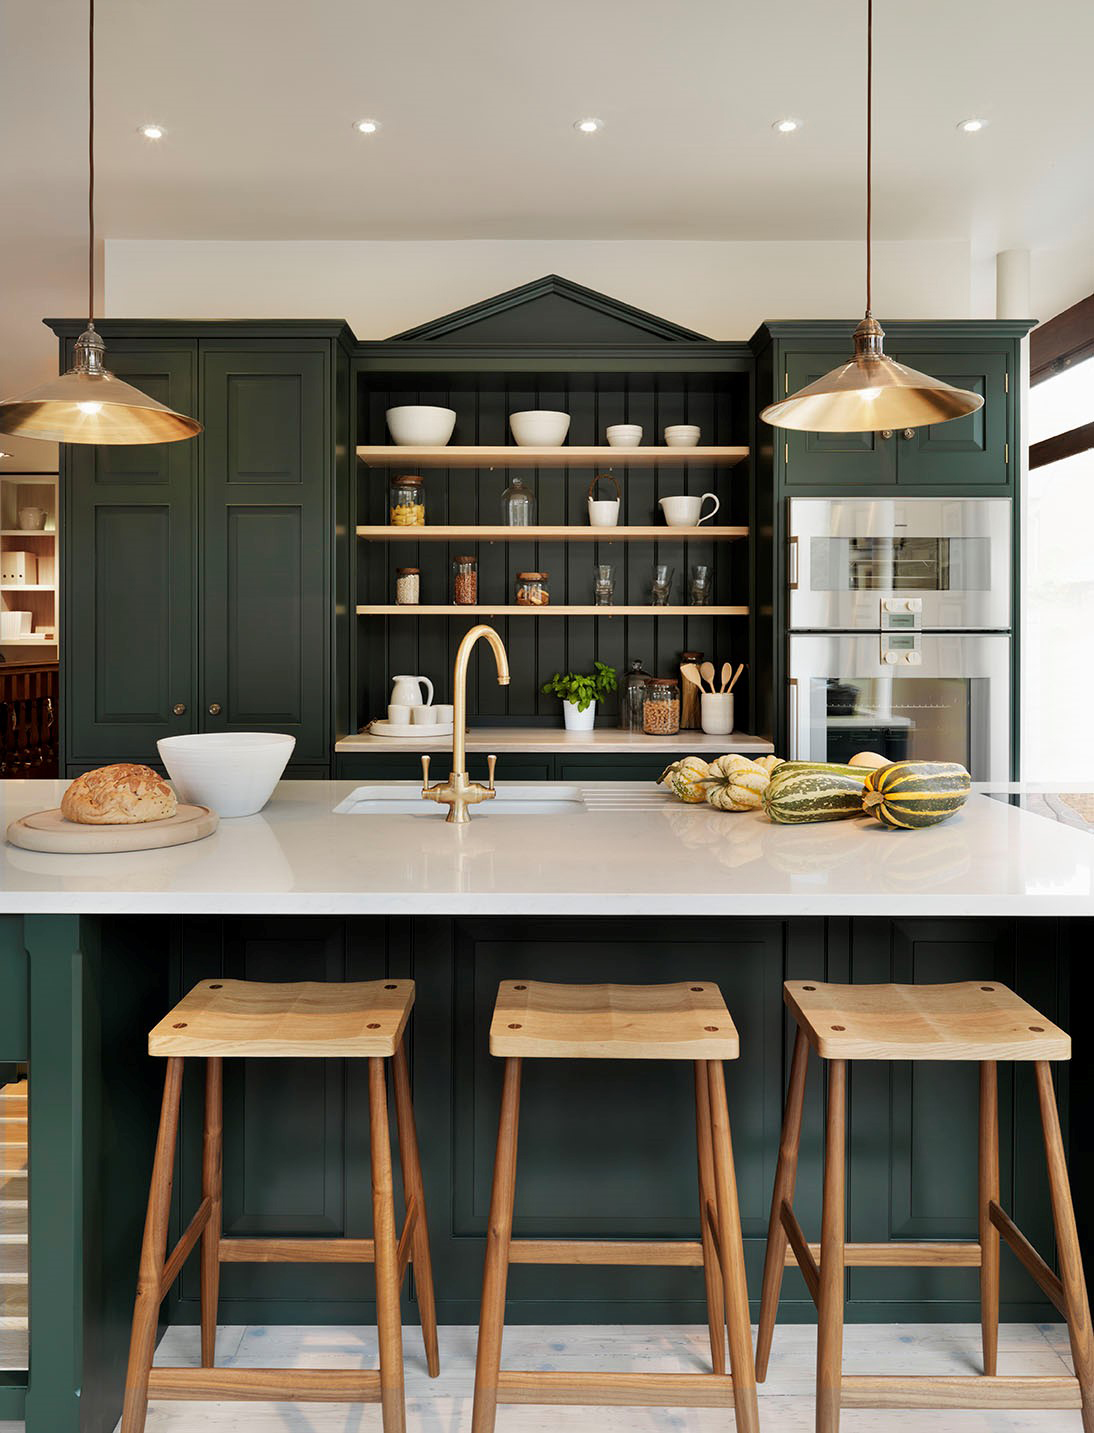 Kitchen painted forest green